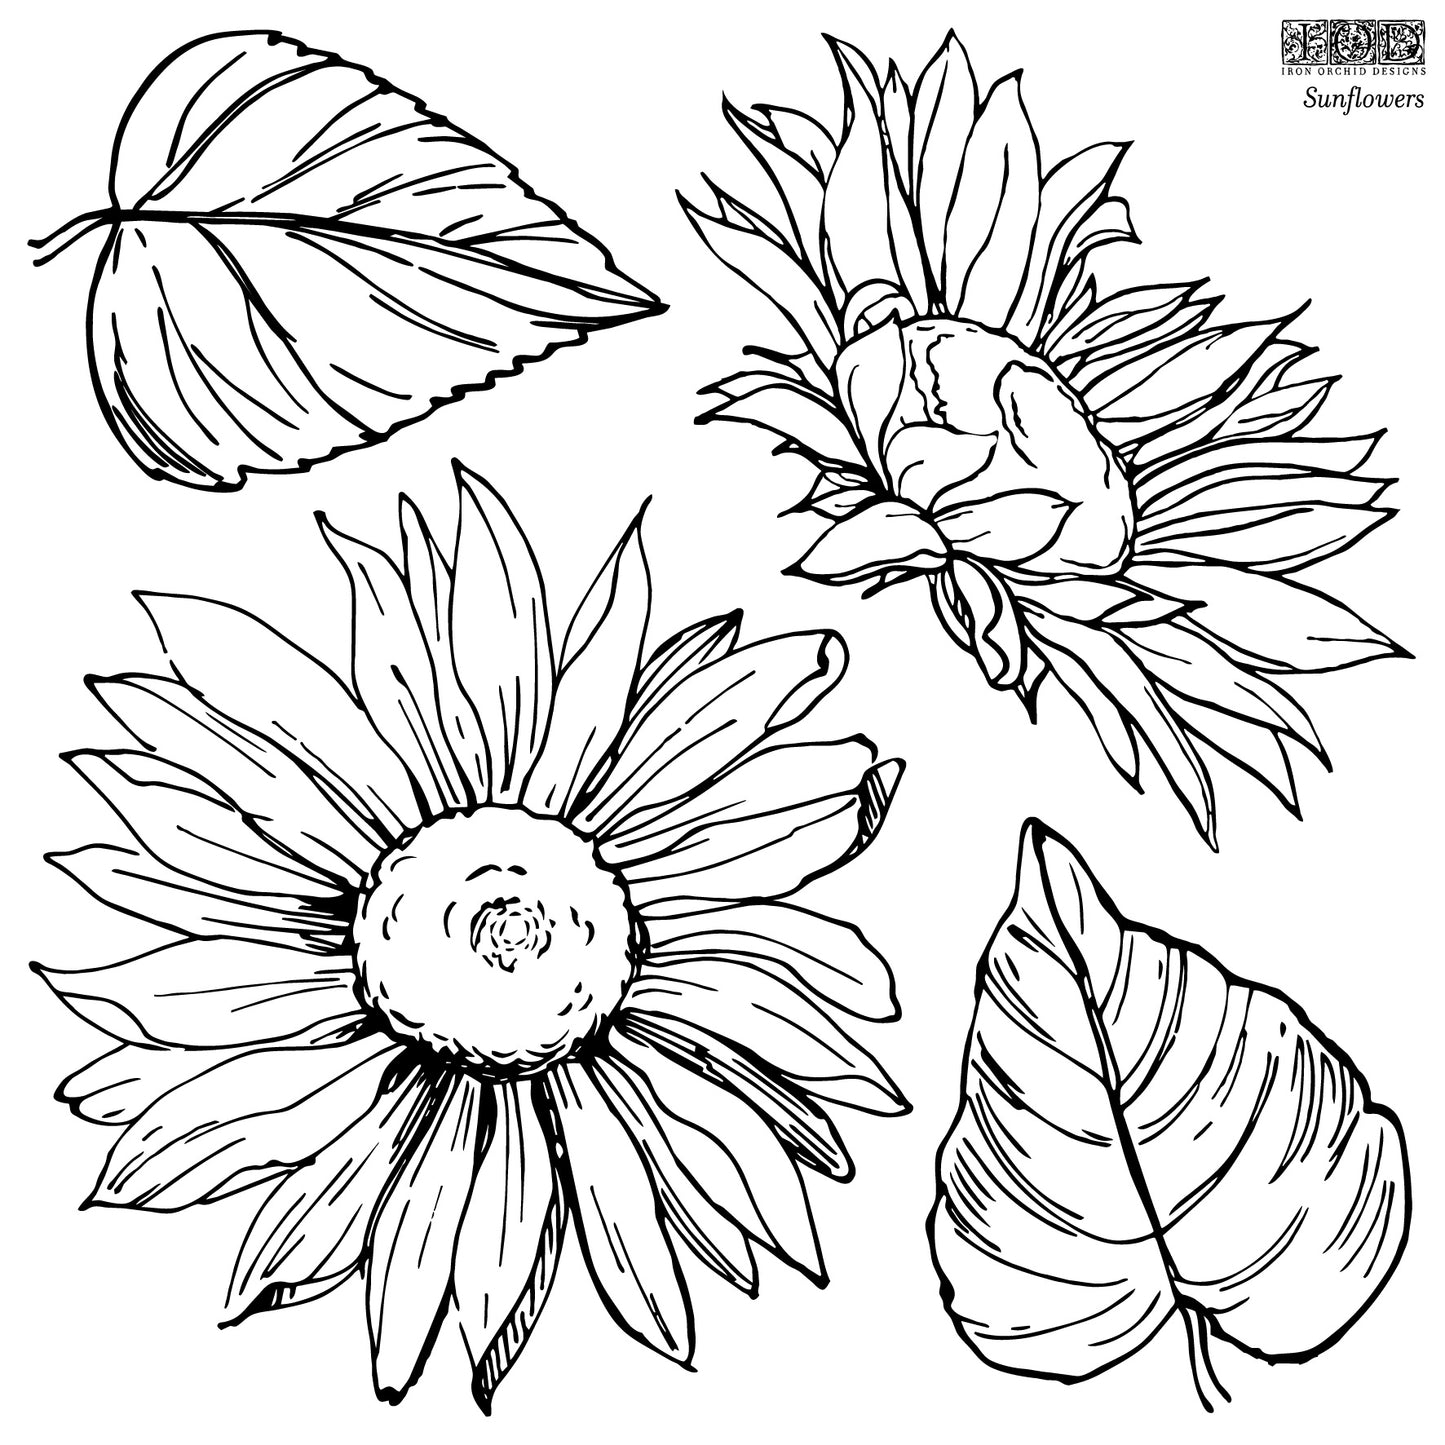 Iron Orchid Designs Sunflowers | IOD Stamp